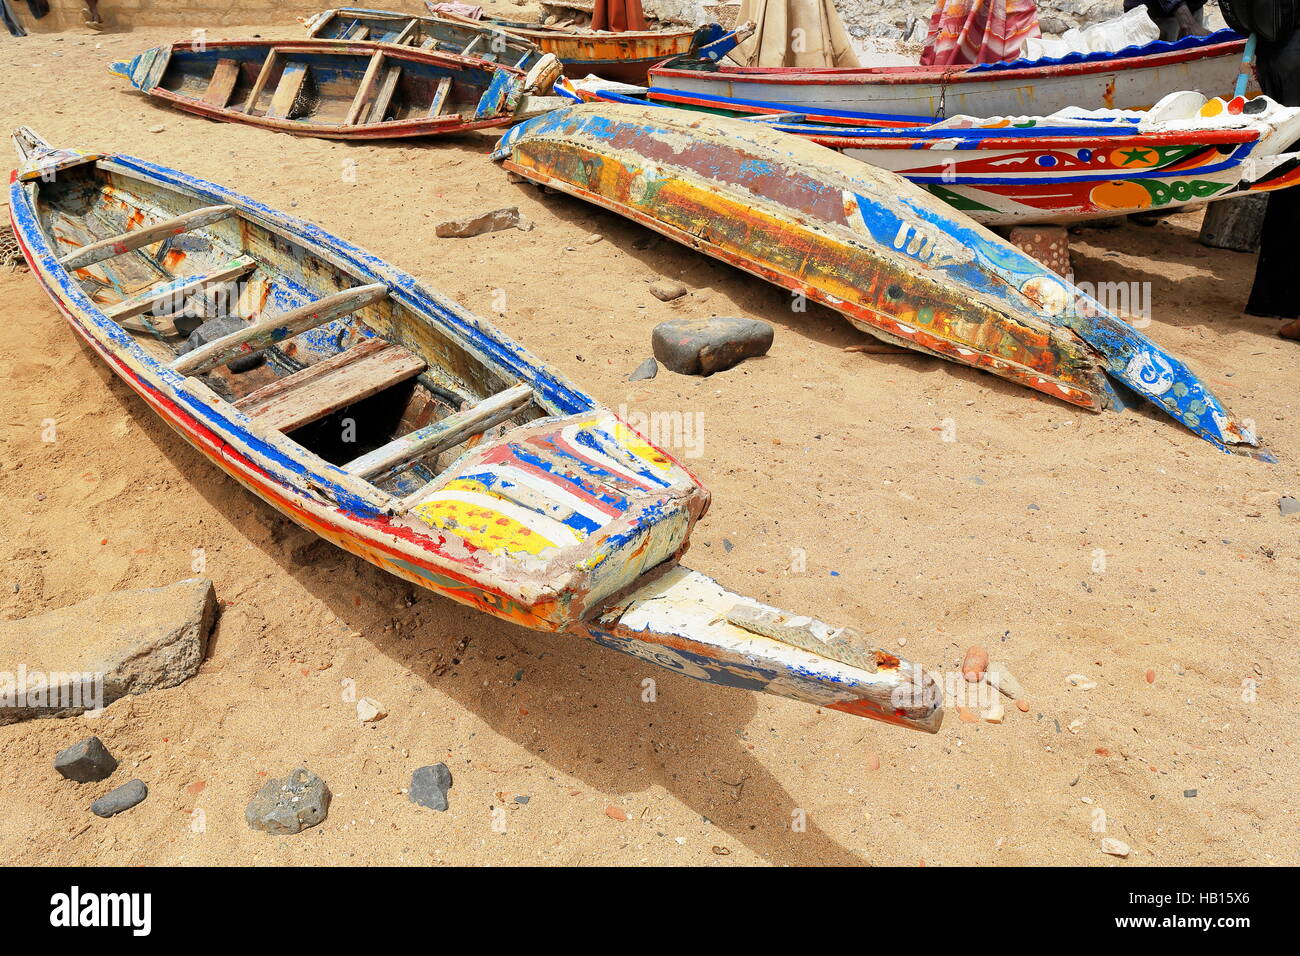 Old wooden colorist fishing boats under the midday sun-seemingly out of order stranded on the sand of the beach inside the harbor of Goree island Stock Photo